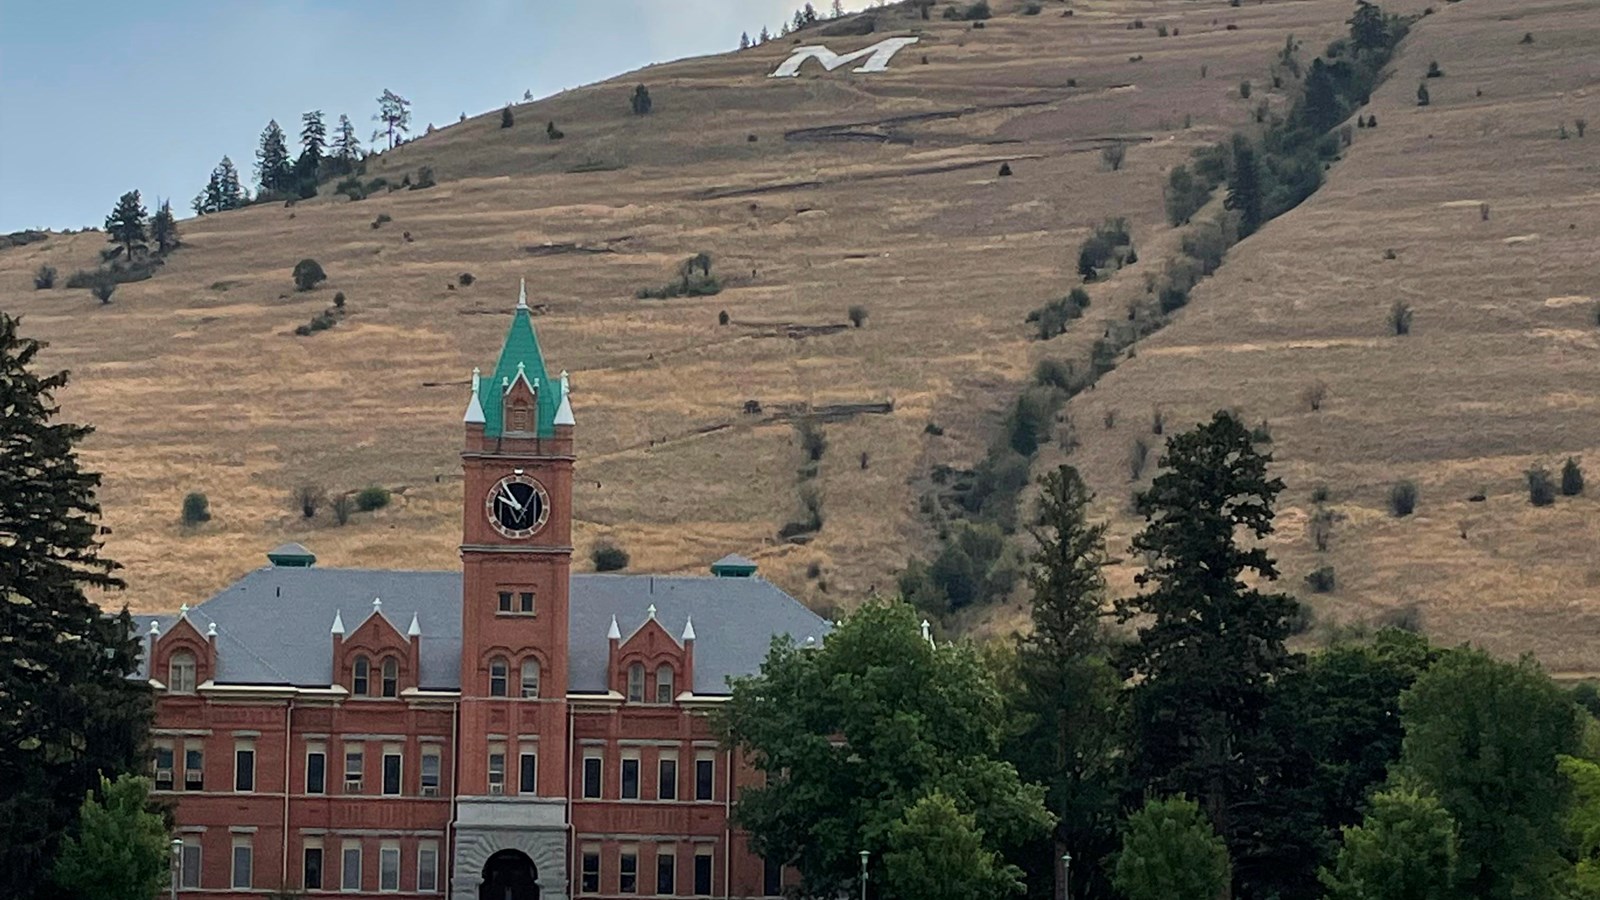 University of Montana building - Glacial Lake Missoula Strandlines on the mountain in the background